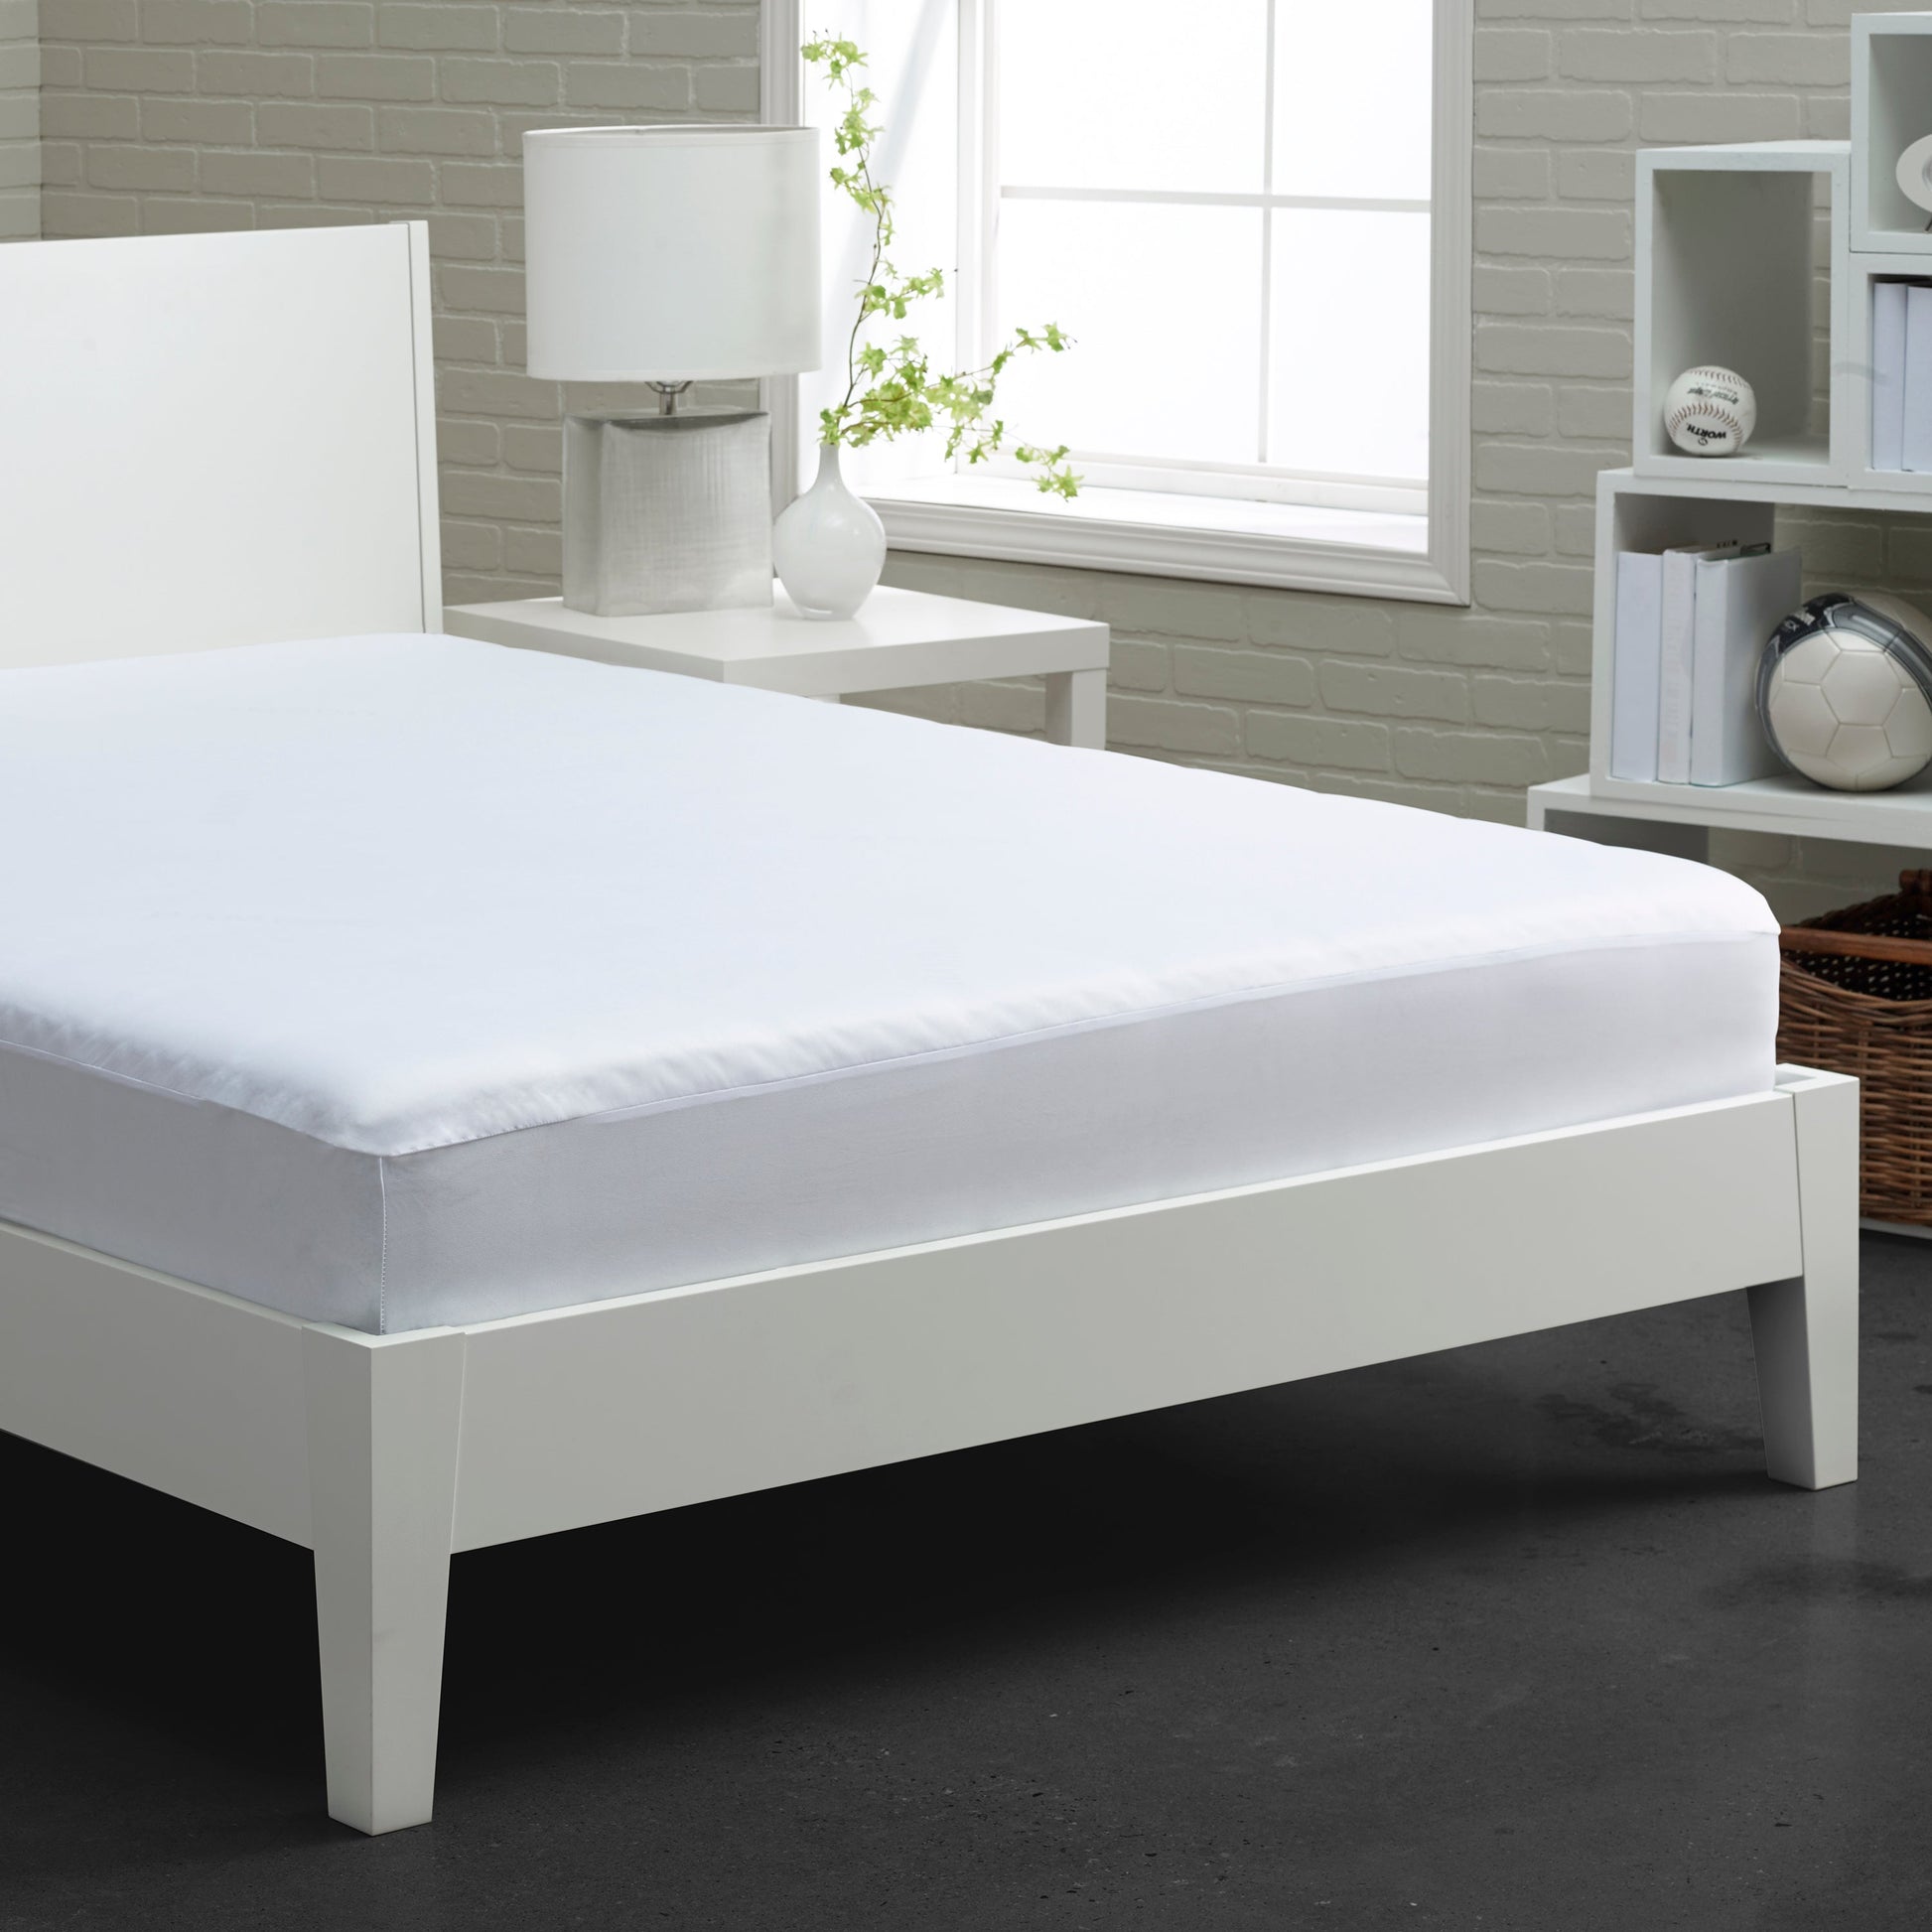 Bedgear StretchWick Mattress Protector shown on bed